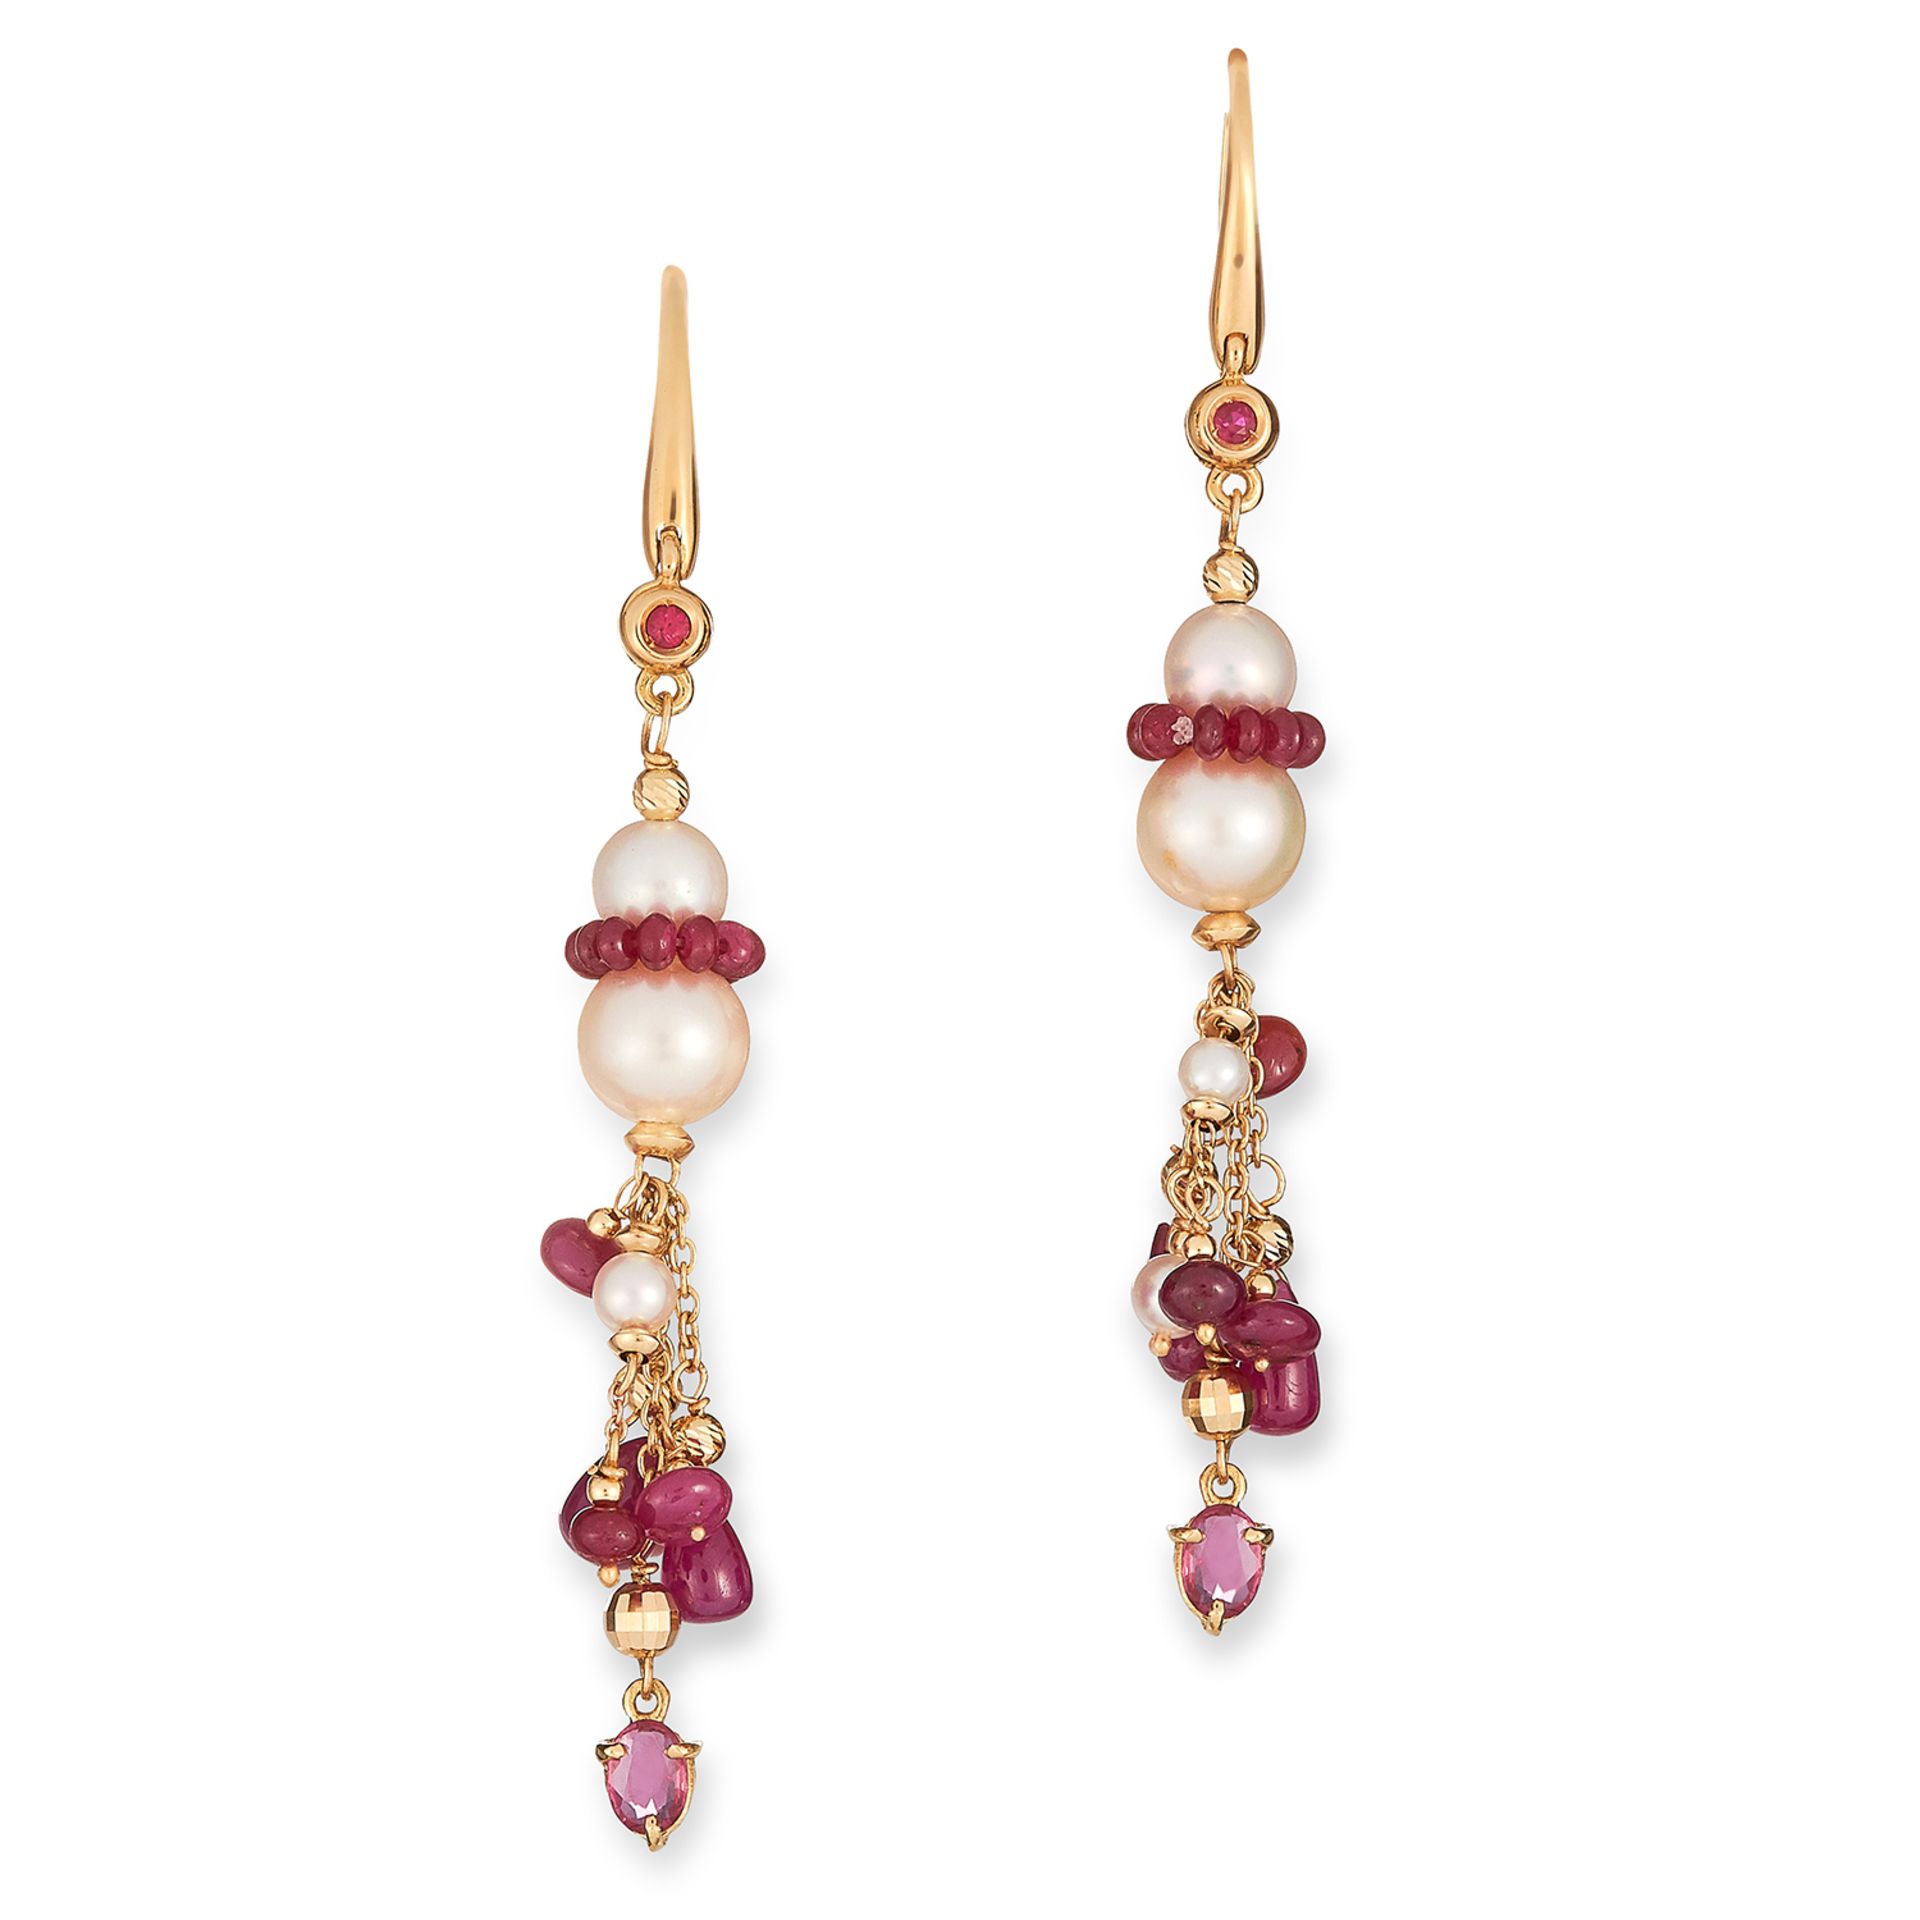 PEARL AND RUBY EARRINGS comprising of pearl and polished ruby beads, 8.1cm, 12.5g.